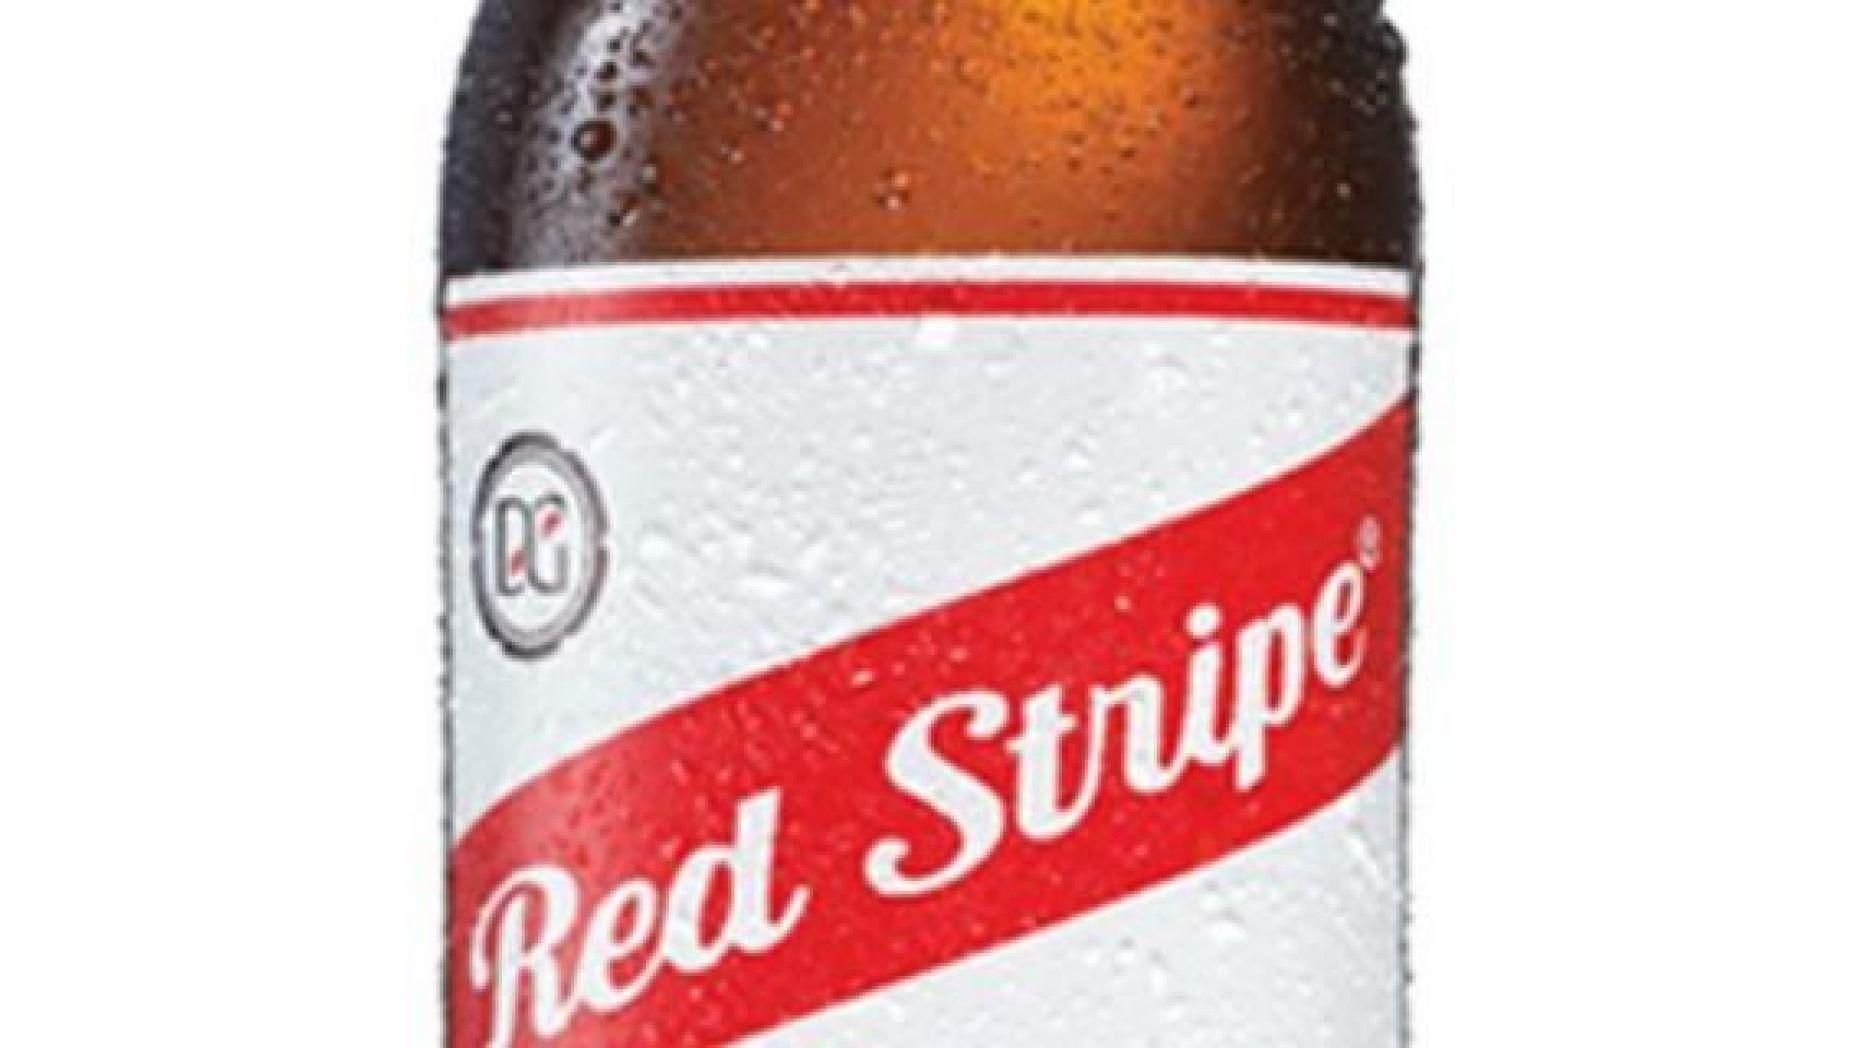 Red Stripe Beer Logo - Red Stripe sued over misleading 'Jamaican' beer claims